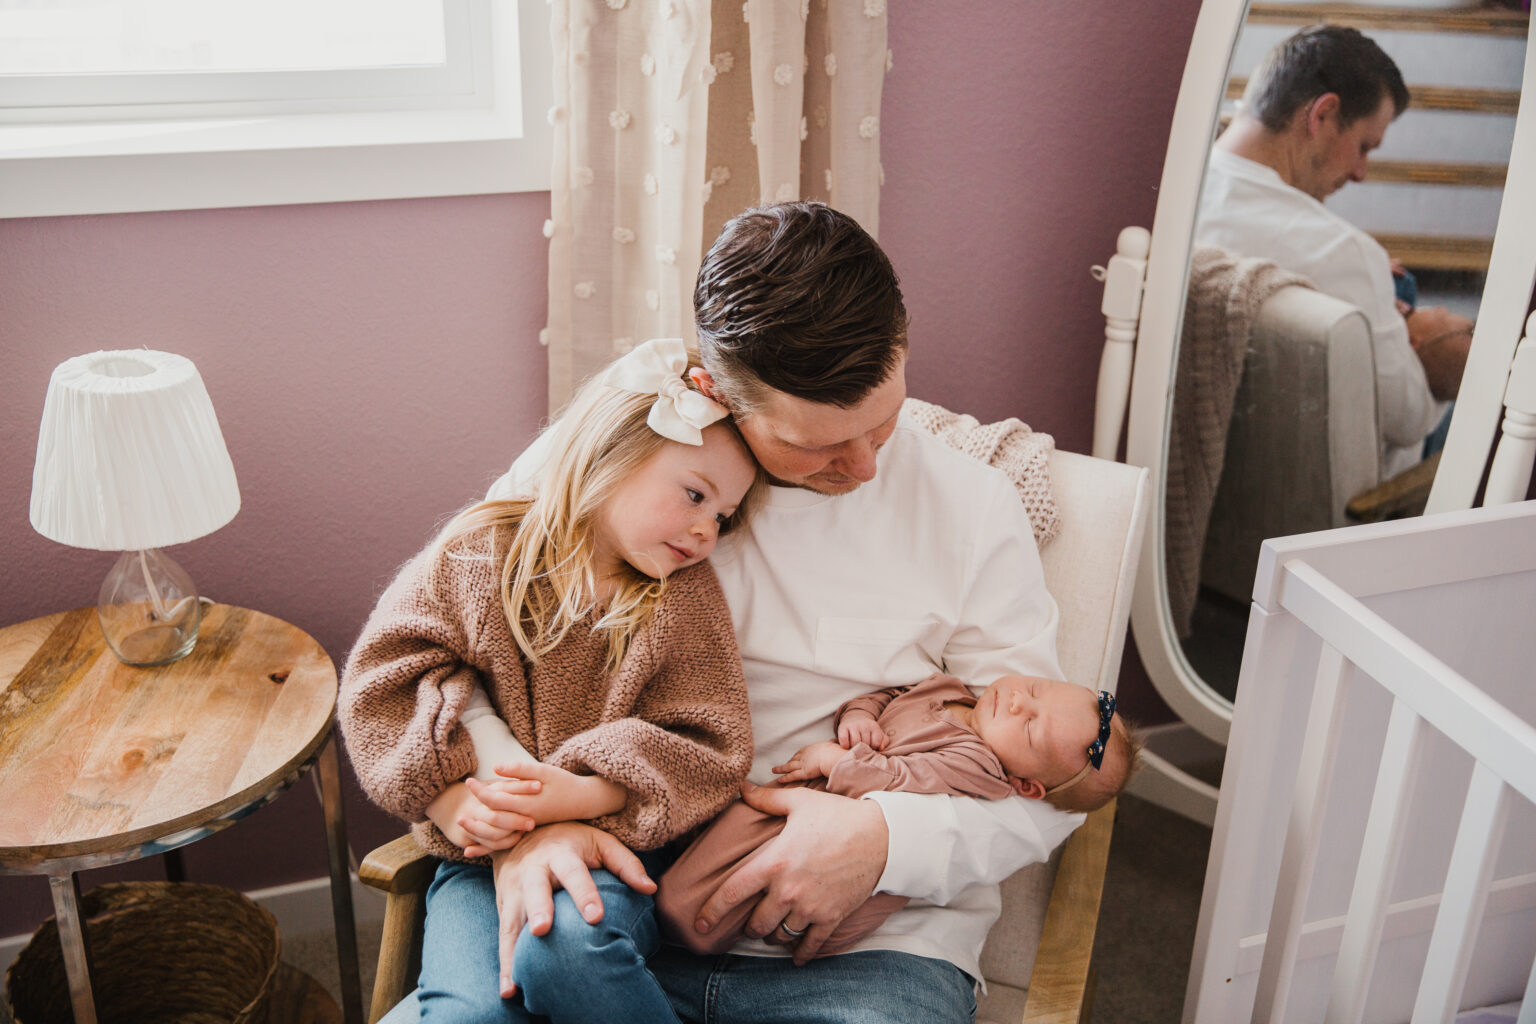 Capturing the different rooms in the newborn photos will be something you will love to look back on.